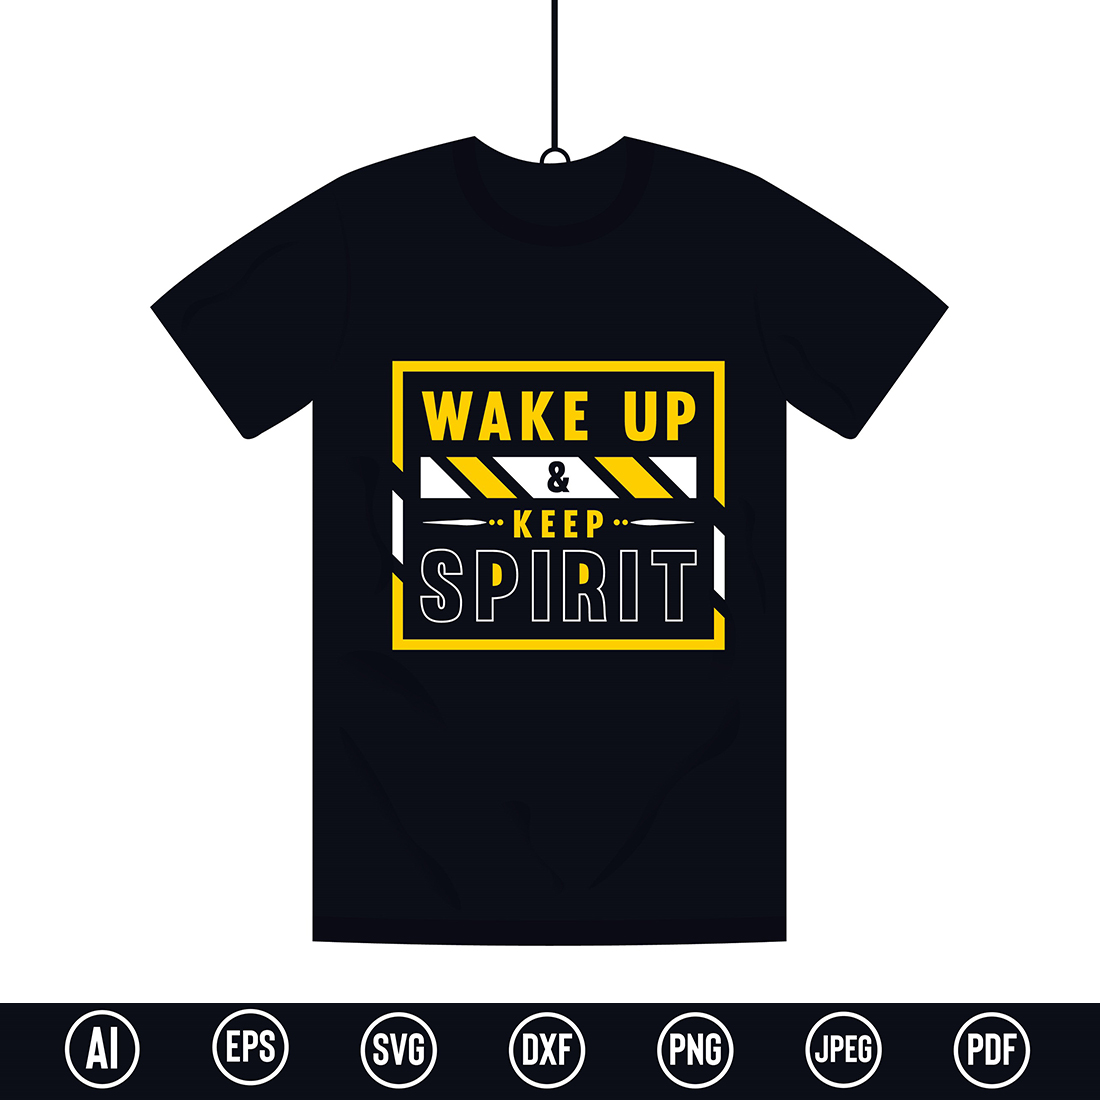 Modern Typography T-Shirt design with “Wake Up & Keep Spirit” quote for t-shirt, posters, stickers, mug prints, banners, gift cards, labels etc cover image.